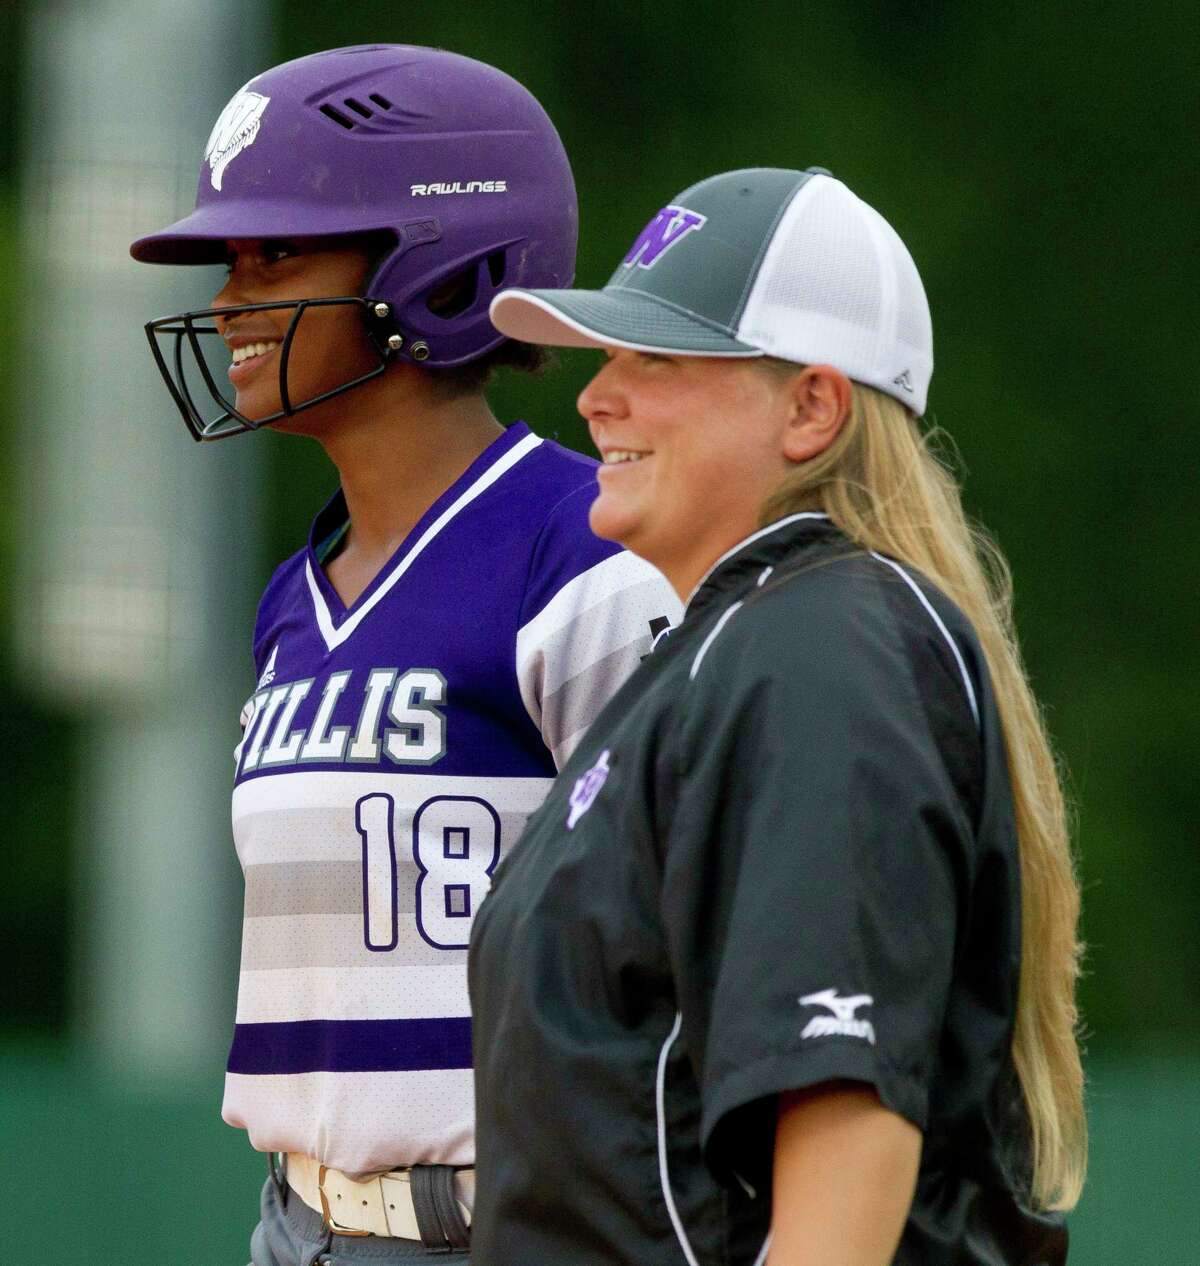 Samara Lagway #18 of Willis shares a laugh with assistant coach Lyndsey Lipscomb after hitting a RBI single during the second inning of a District 20-5A high school softball game, Tuesday, April 25, 2017, in Montgomery.